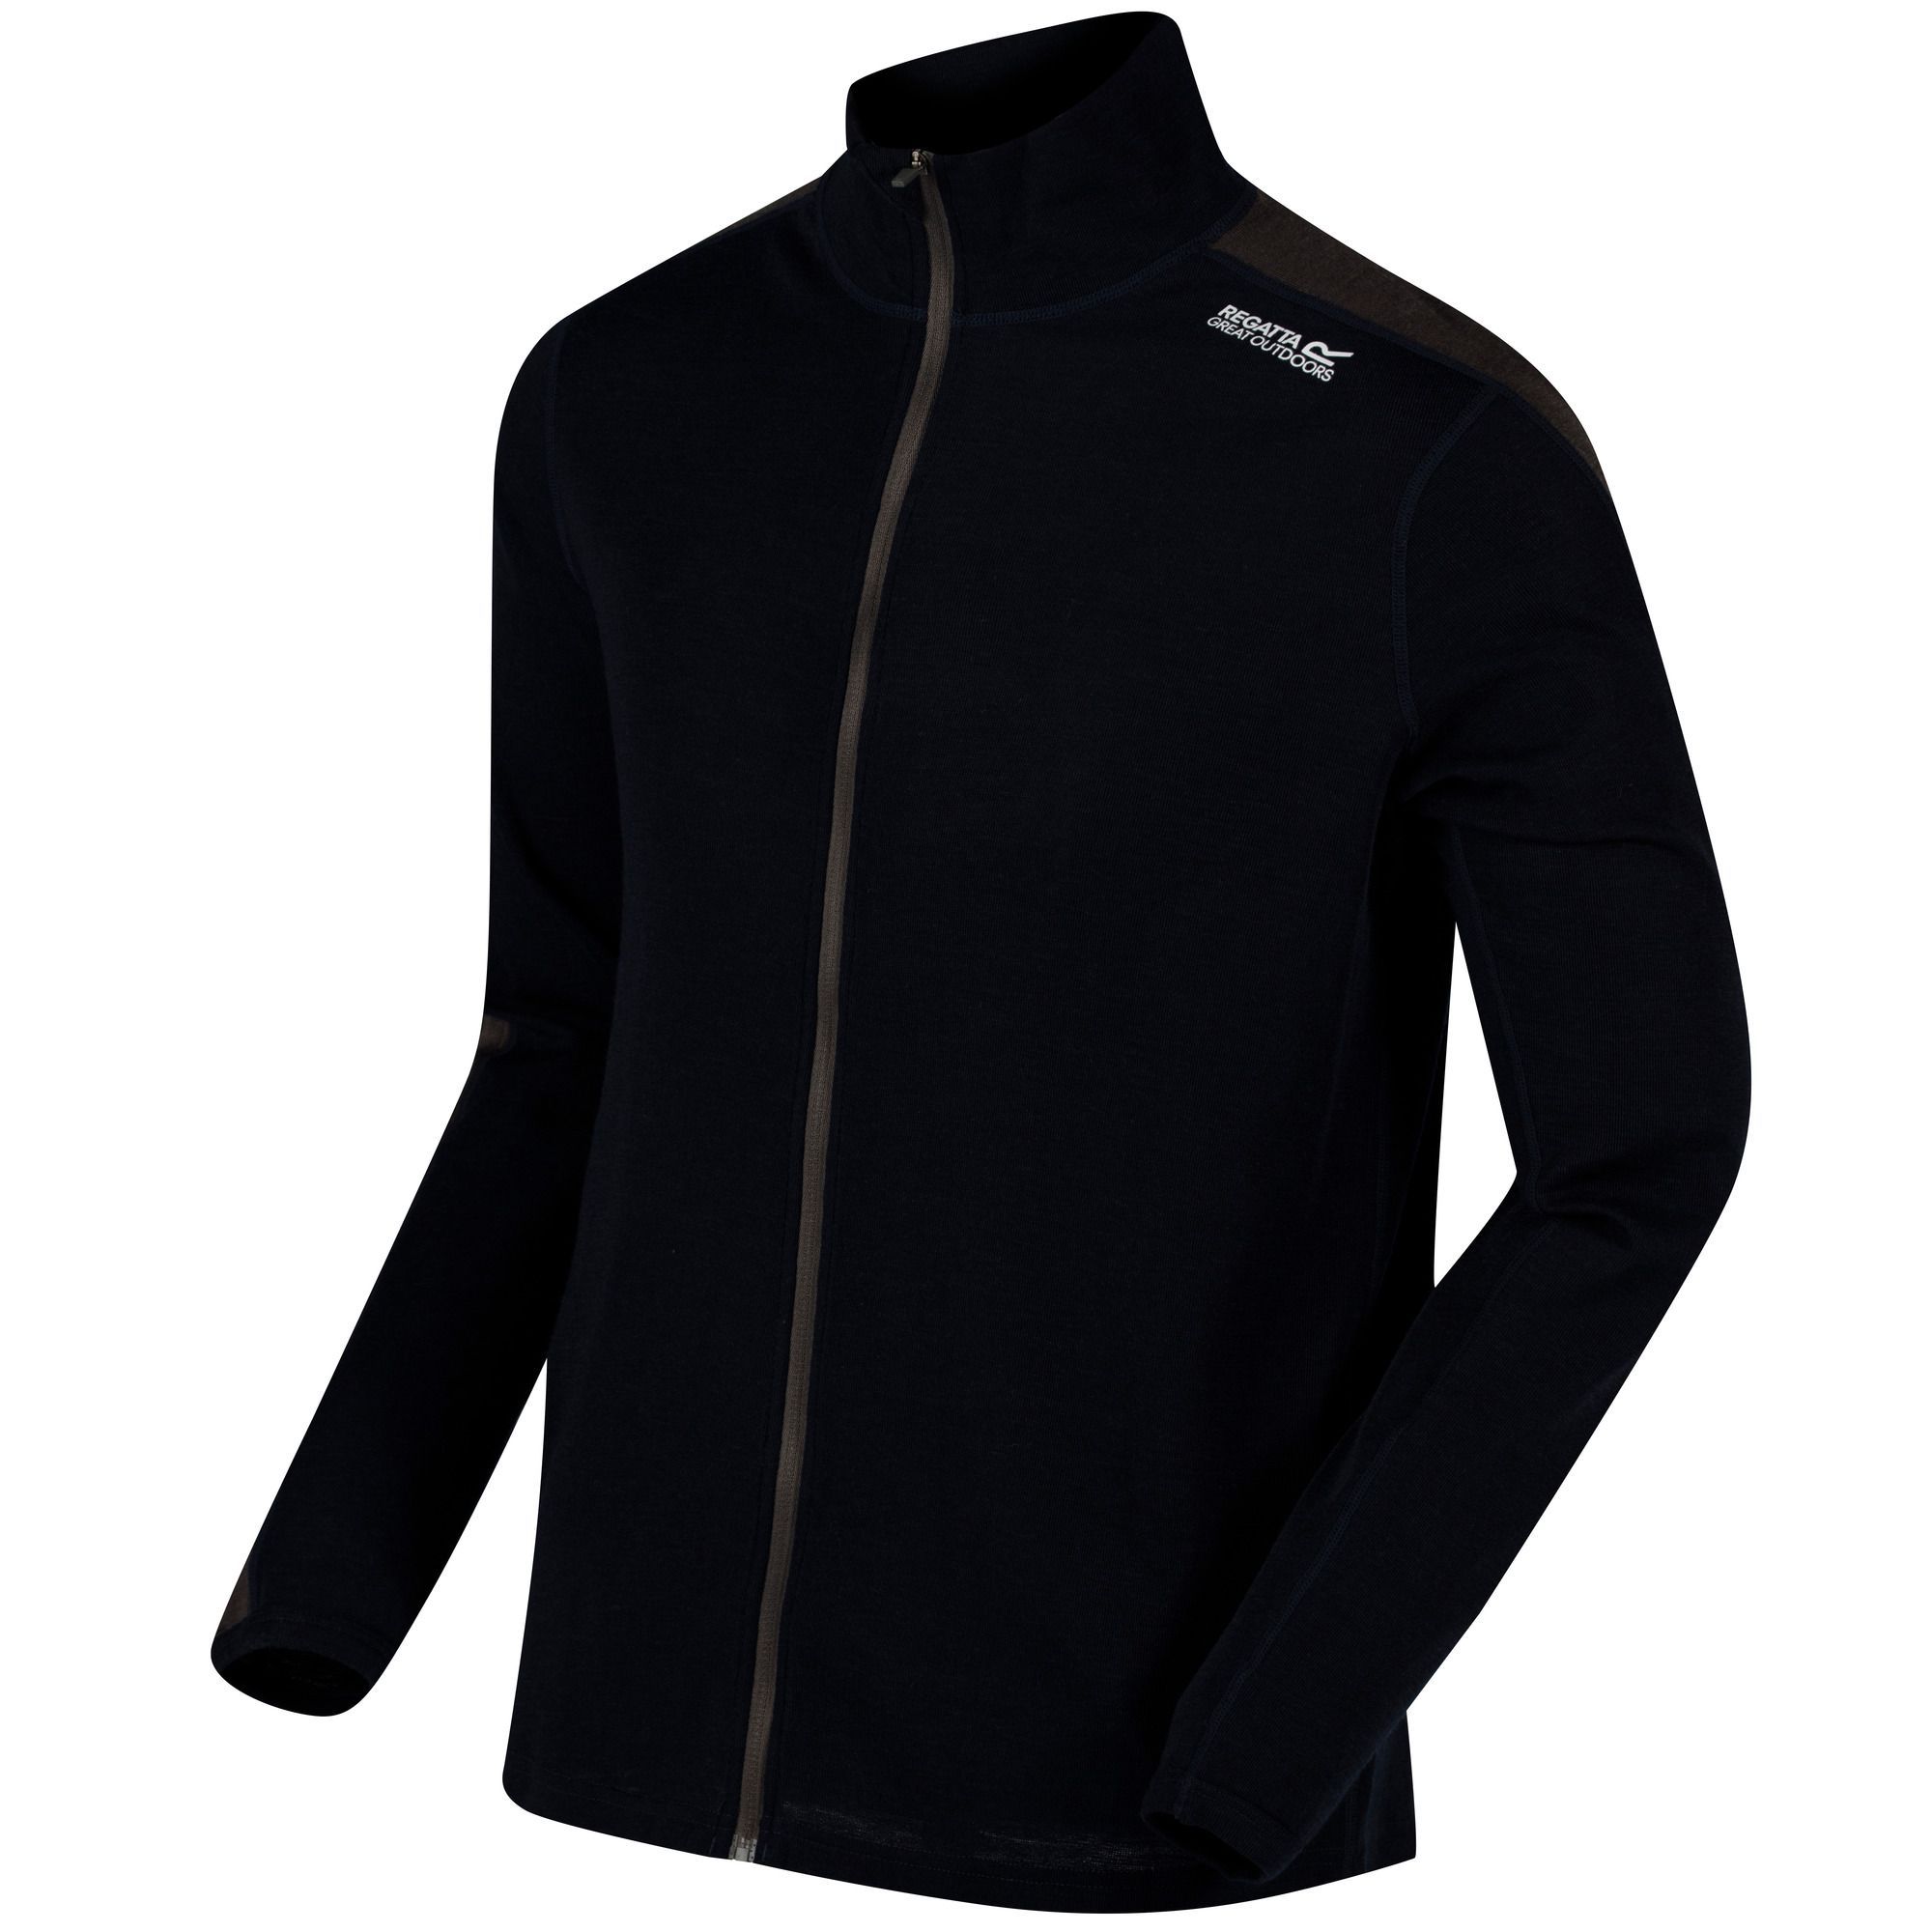 50% Wool, 50% Polyester. Long sleeved Merino wool blend base layer. Wicking and odour control. With a snug funnel neck and the Regatta embroidery on the left shoulder.